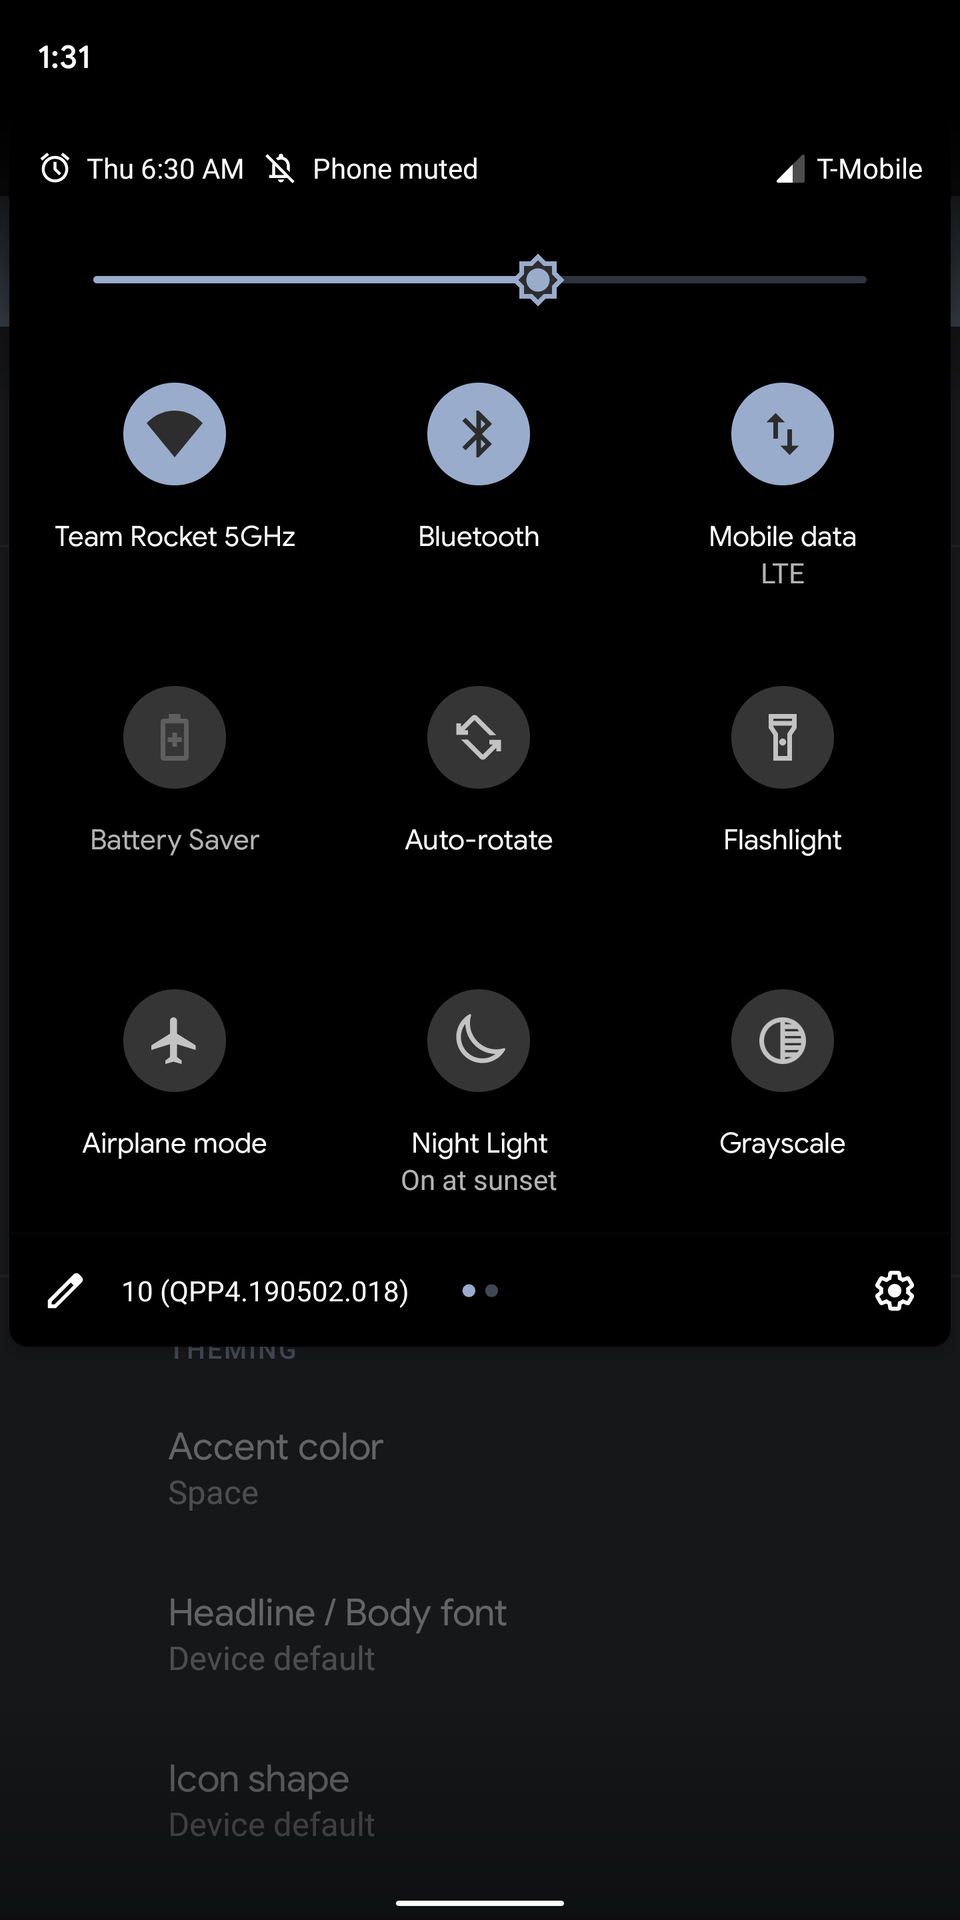 Android Q Beta 4 Space Accent Color